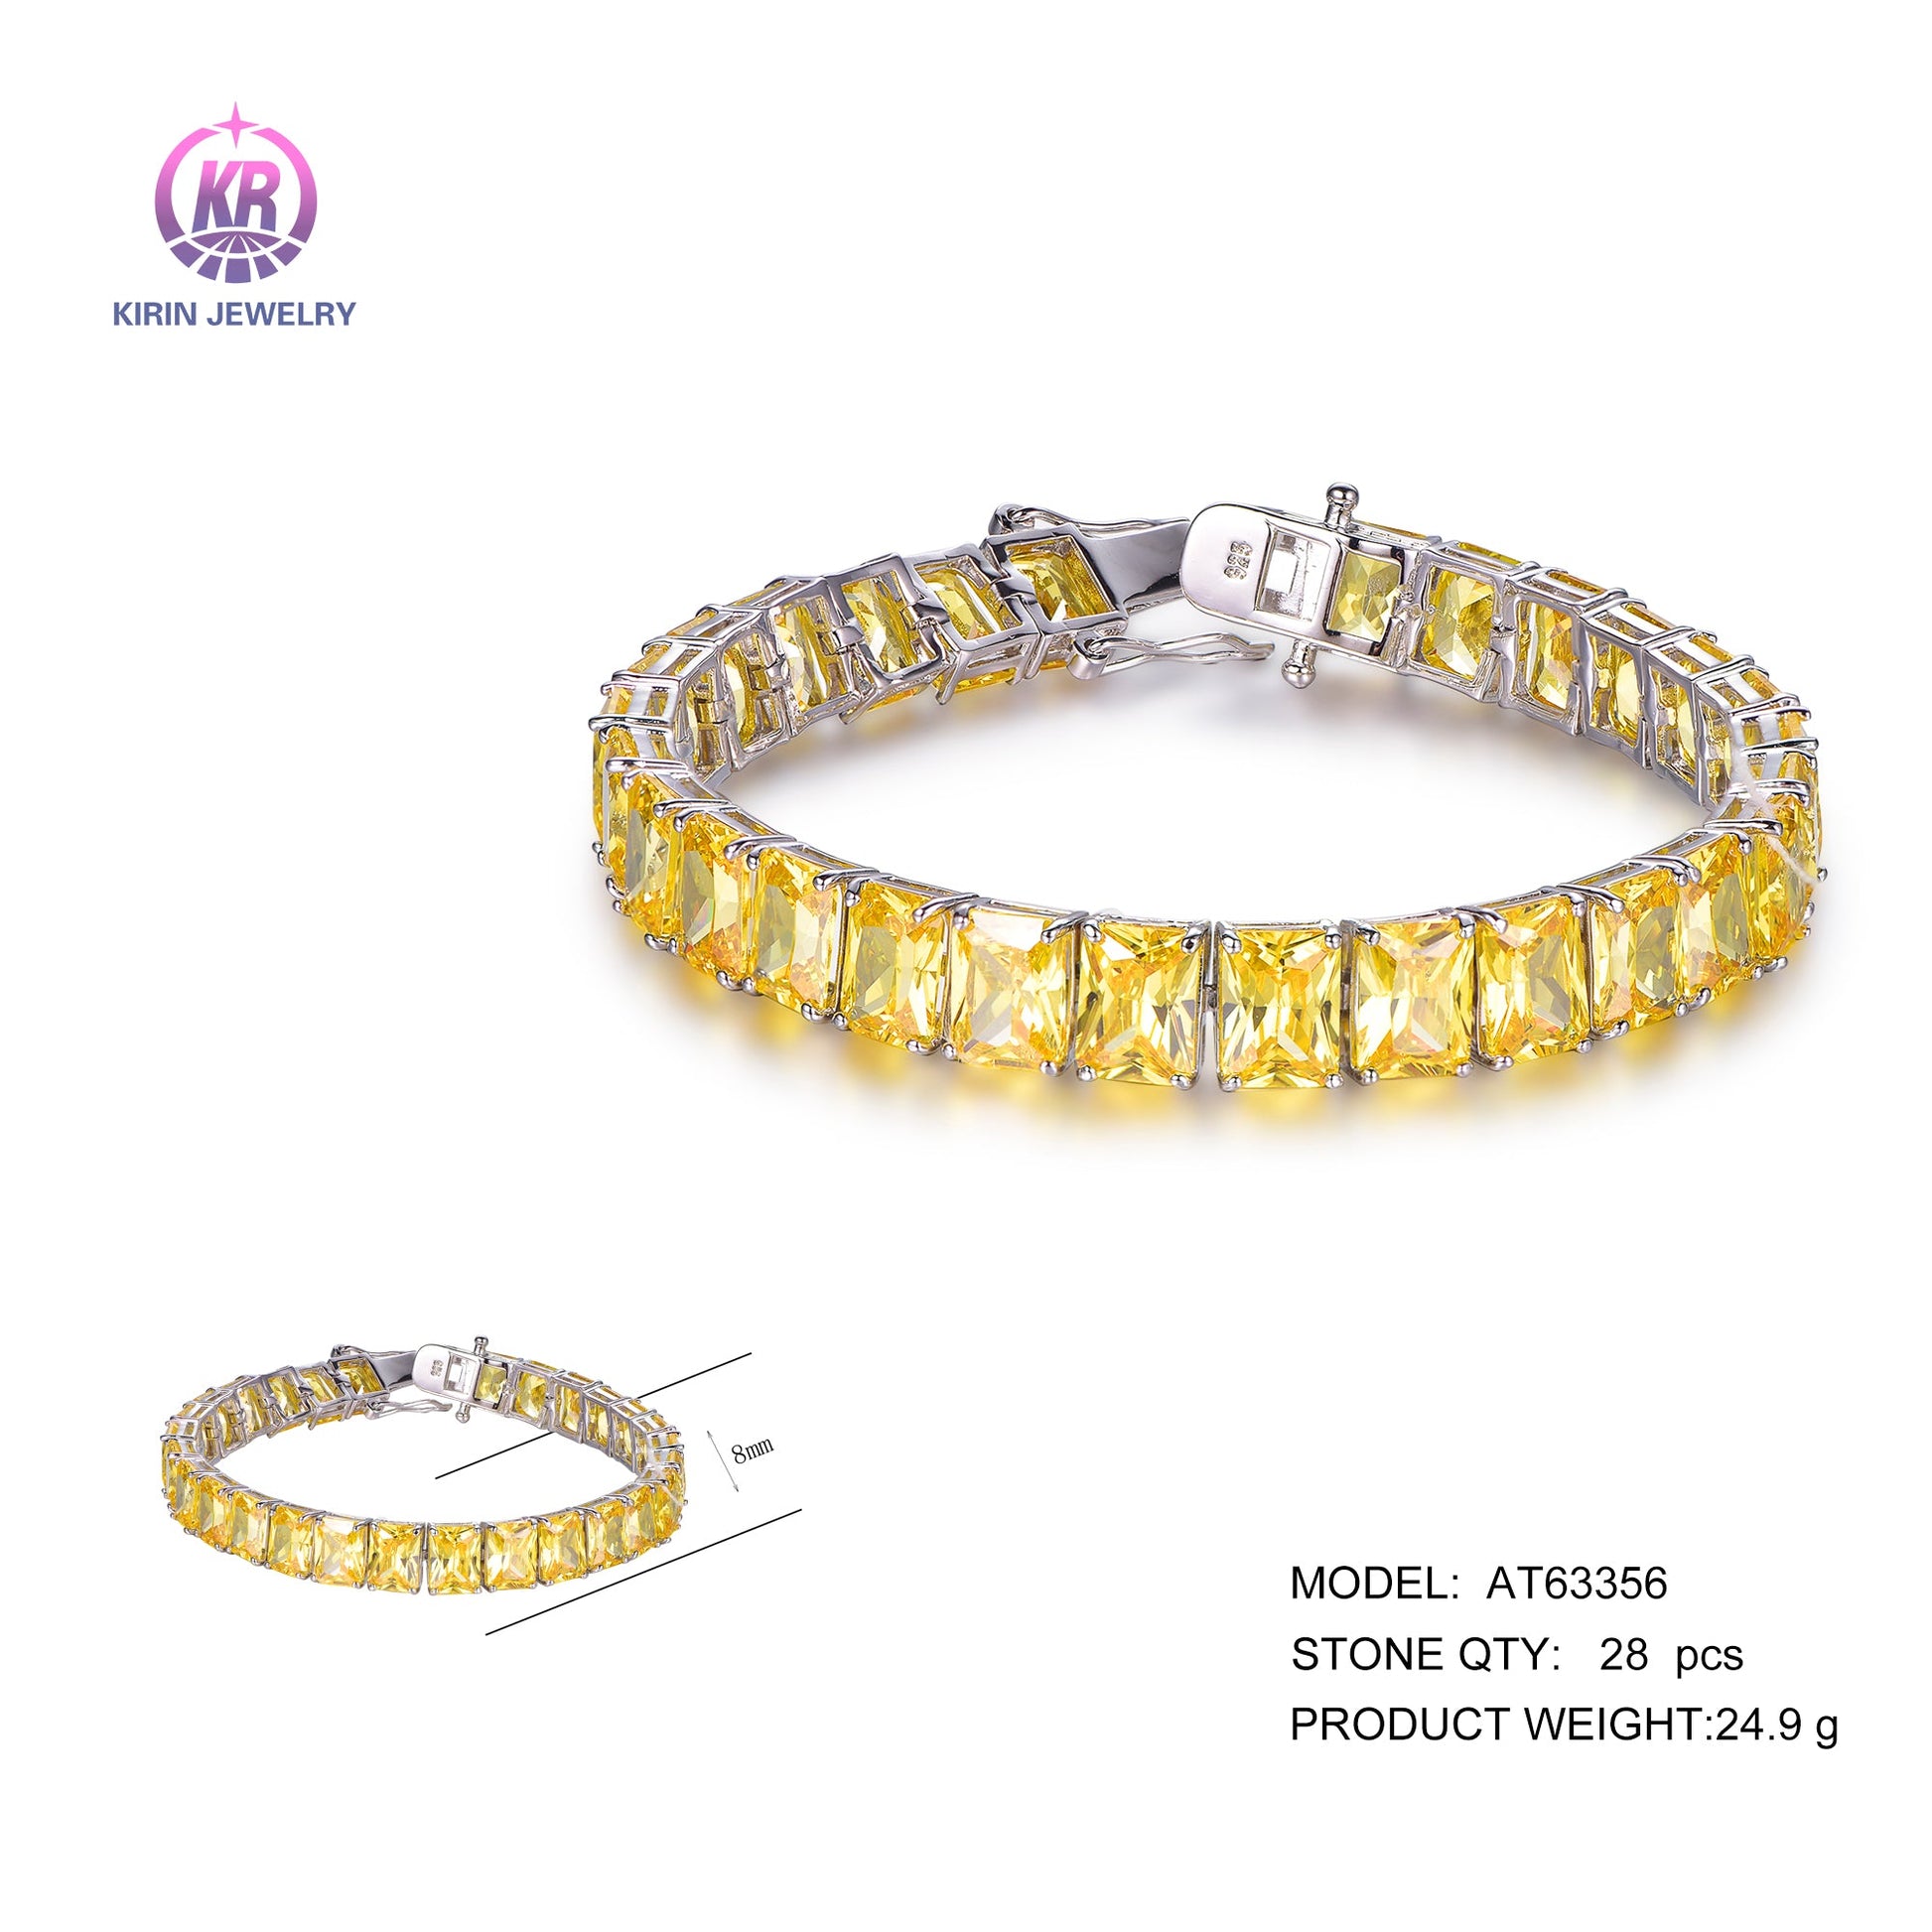 925 silver bracelet with 14K gold plating yellow CZ AT63356 Kirin Jewelry